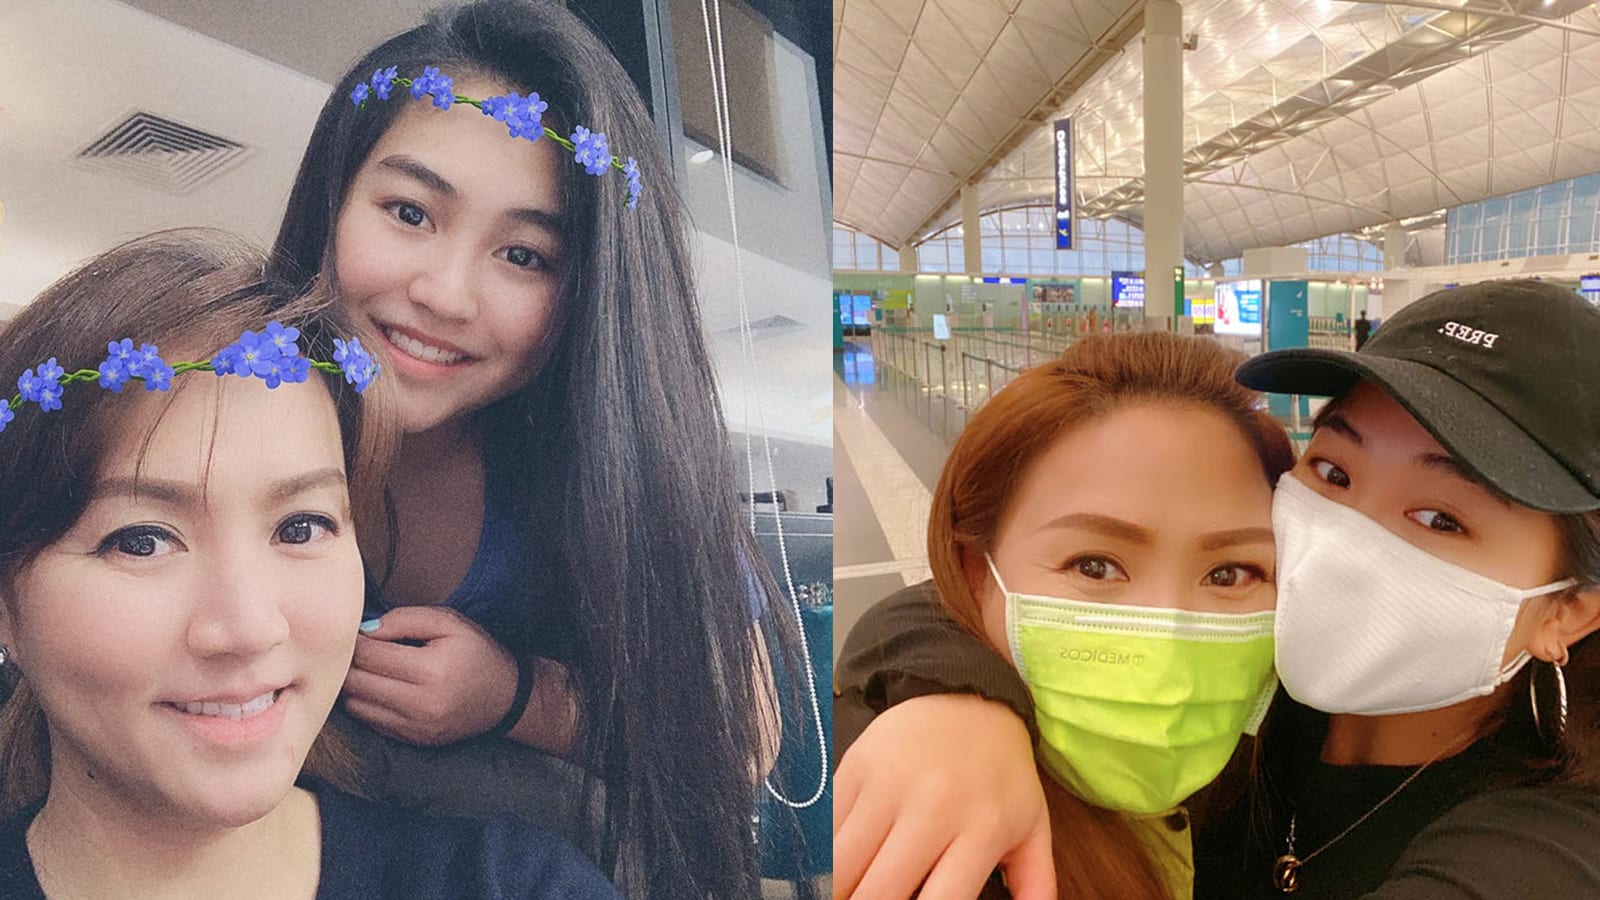 HK Actress Vivian Lai Snaps Back At Chinese Netizens Who Called Her A "Traitor" For Not Sending Her Daughter To A China University